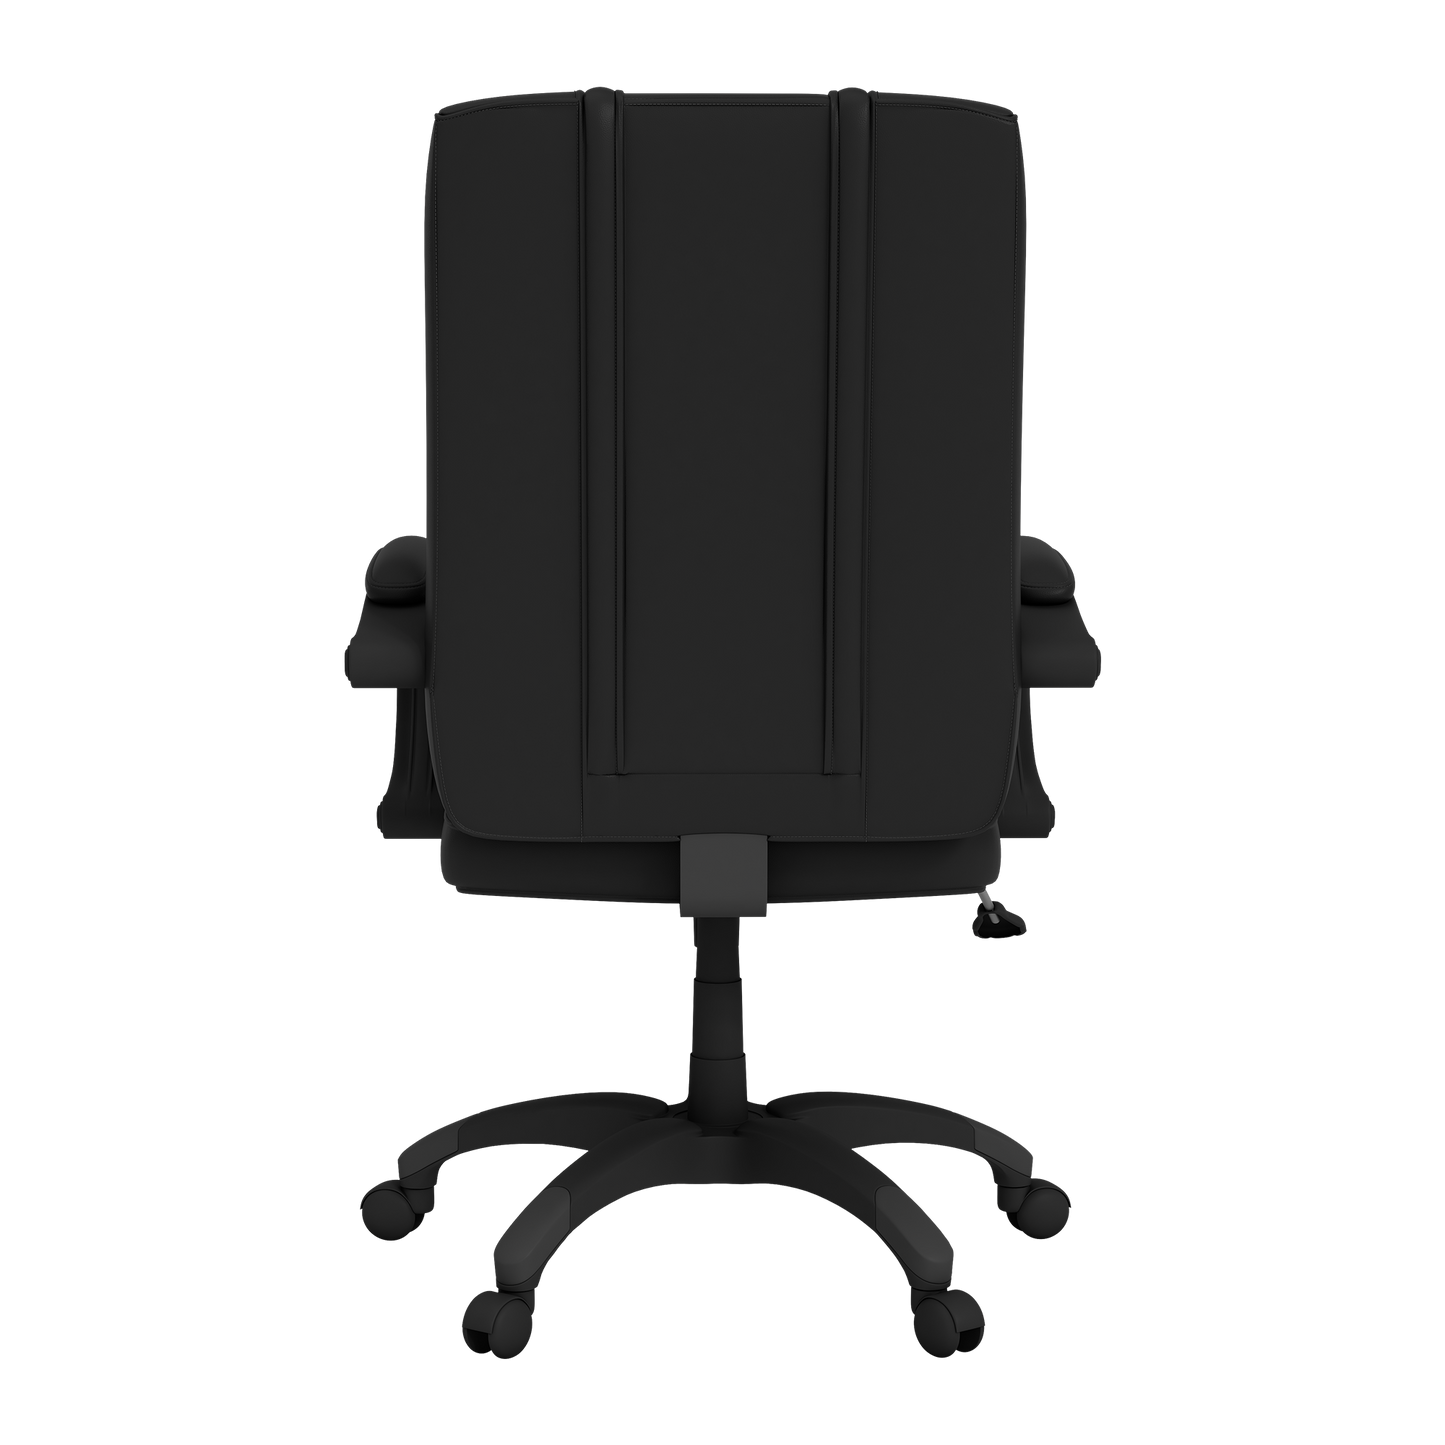 Office Chair 1000 with Notre Dame Secondary Logo